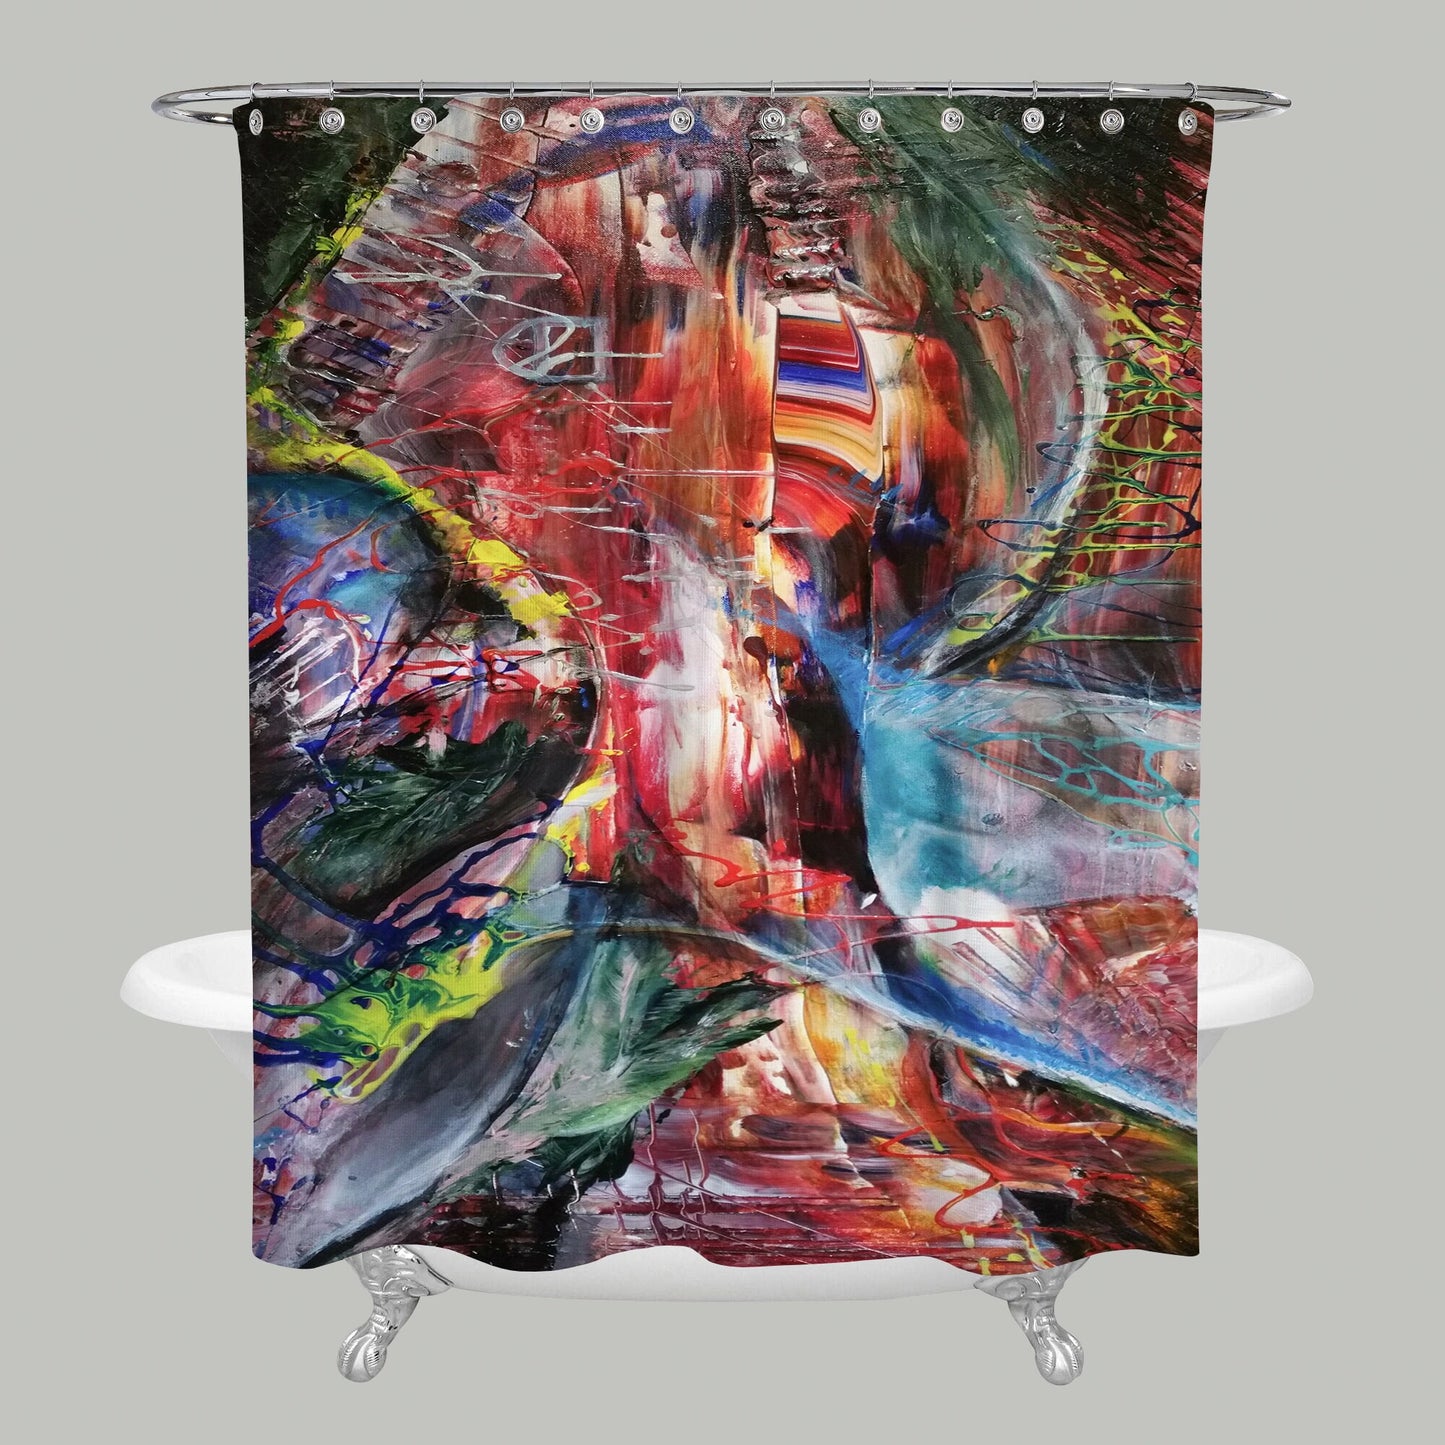 Abstract art shower curtain psychadelic shower curtain psychedelic shower curtain trippy bath decor colorful shower curtain red blue orange